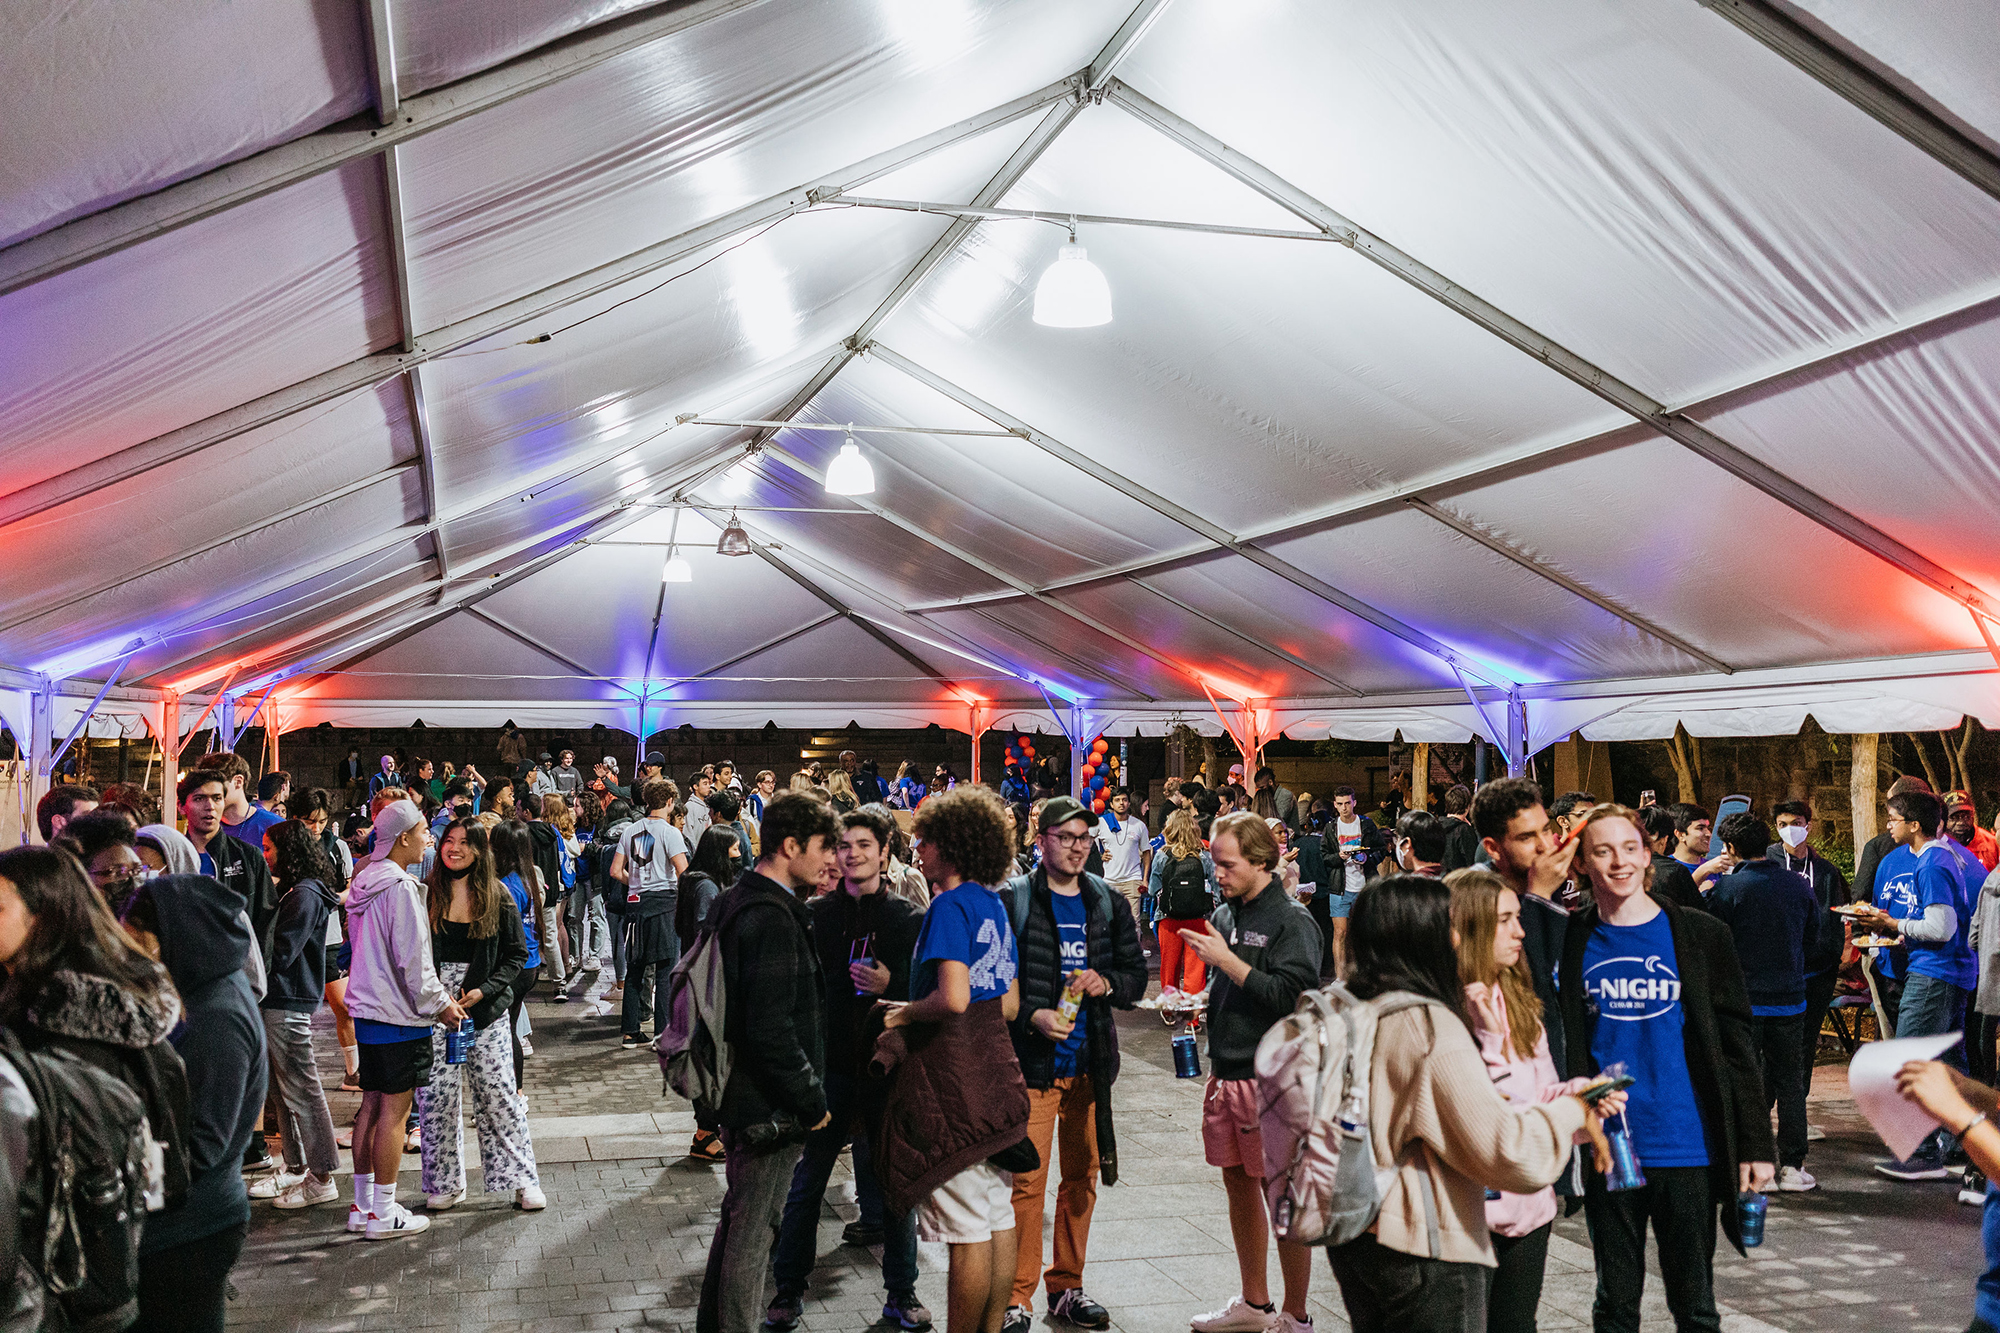 A large group of Penn students gather at night under a large white tent.